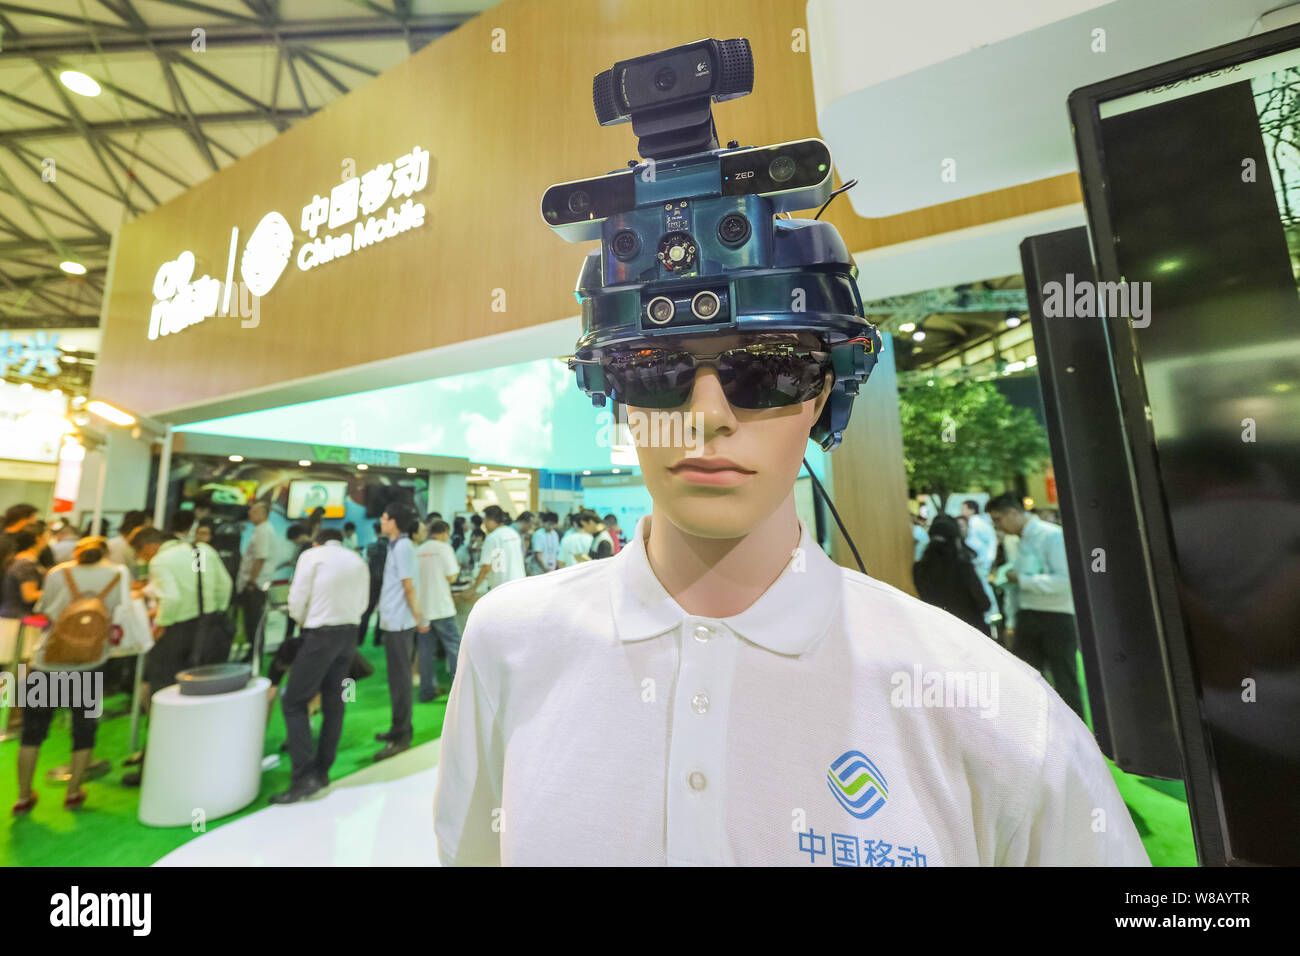 A VR (Virtual Reality) device is on display at the stand of China Mobile during the 2016 Mobile World Congress (MWC) in Shanghai, China, 29 June 2016. Stock Photo